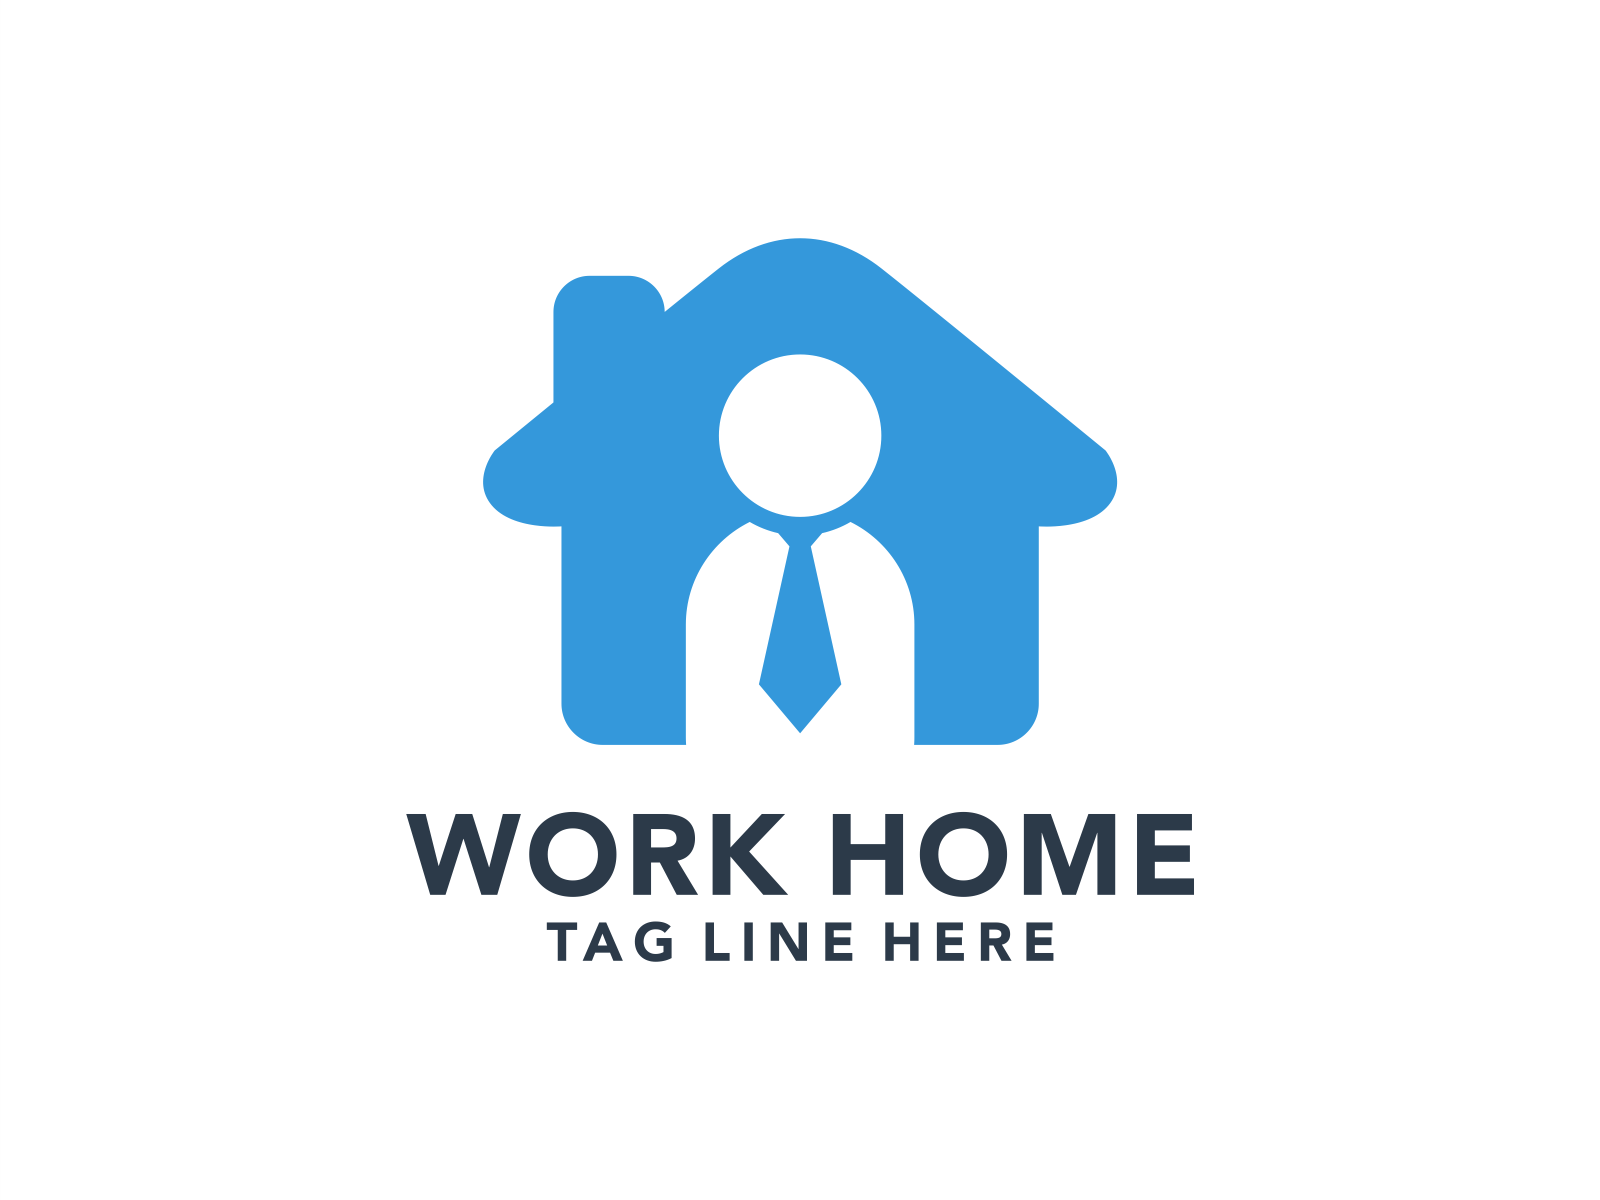 Work from home icon Royalty Free Vector Image - VectorStock